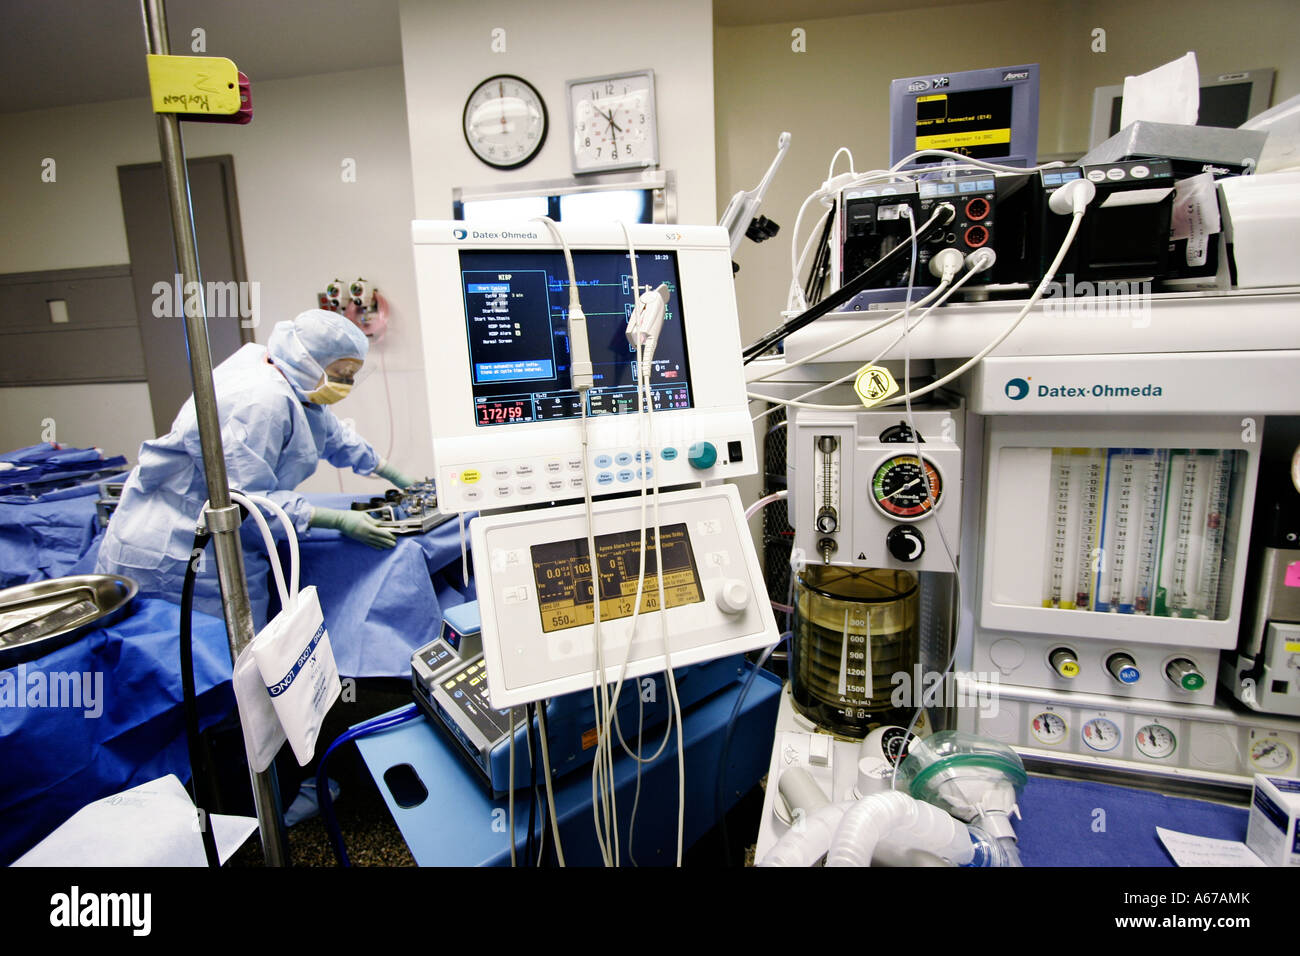 machines for monitoring vital signs and regulating dosages used by anesthesiologist in operating room Stock Photo